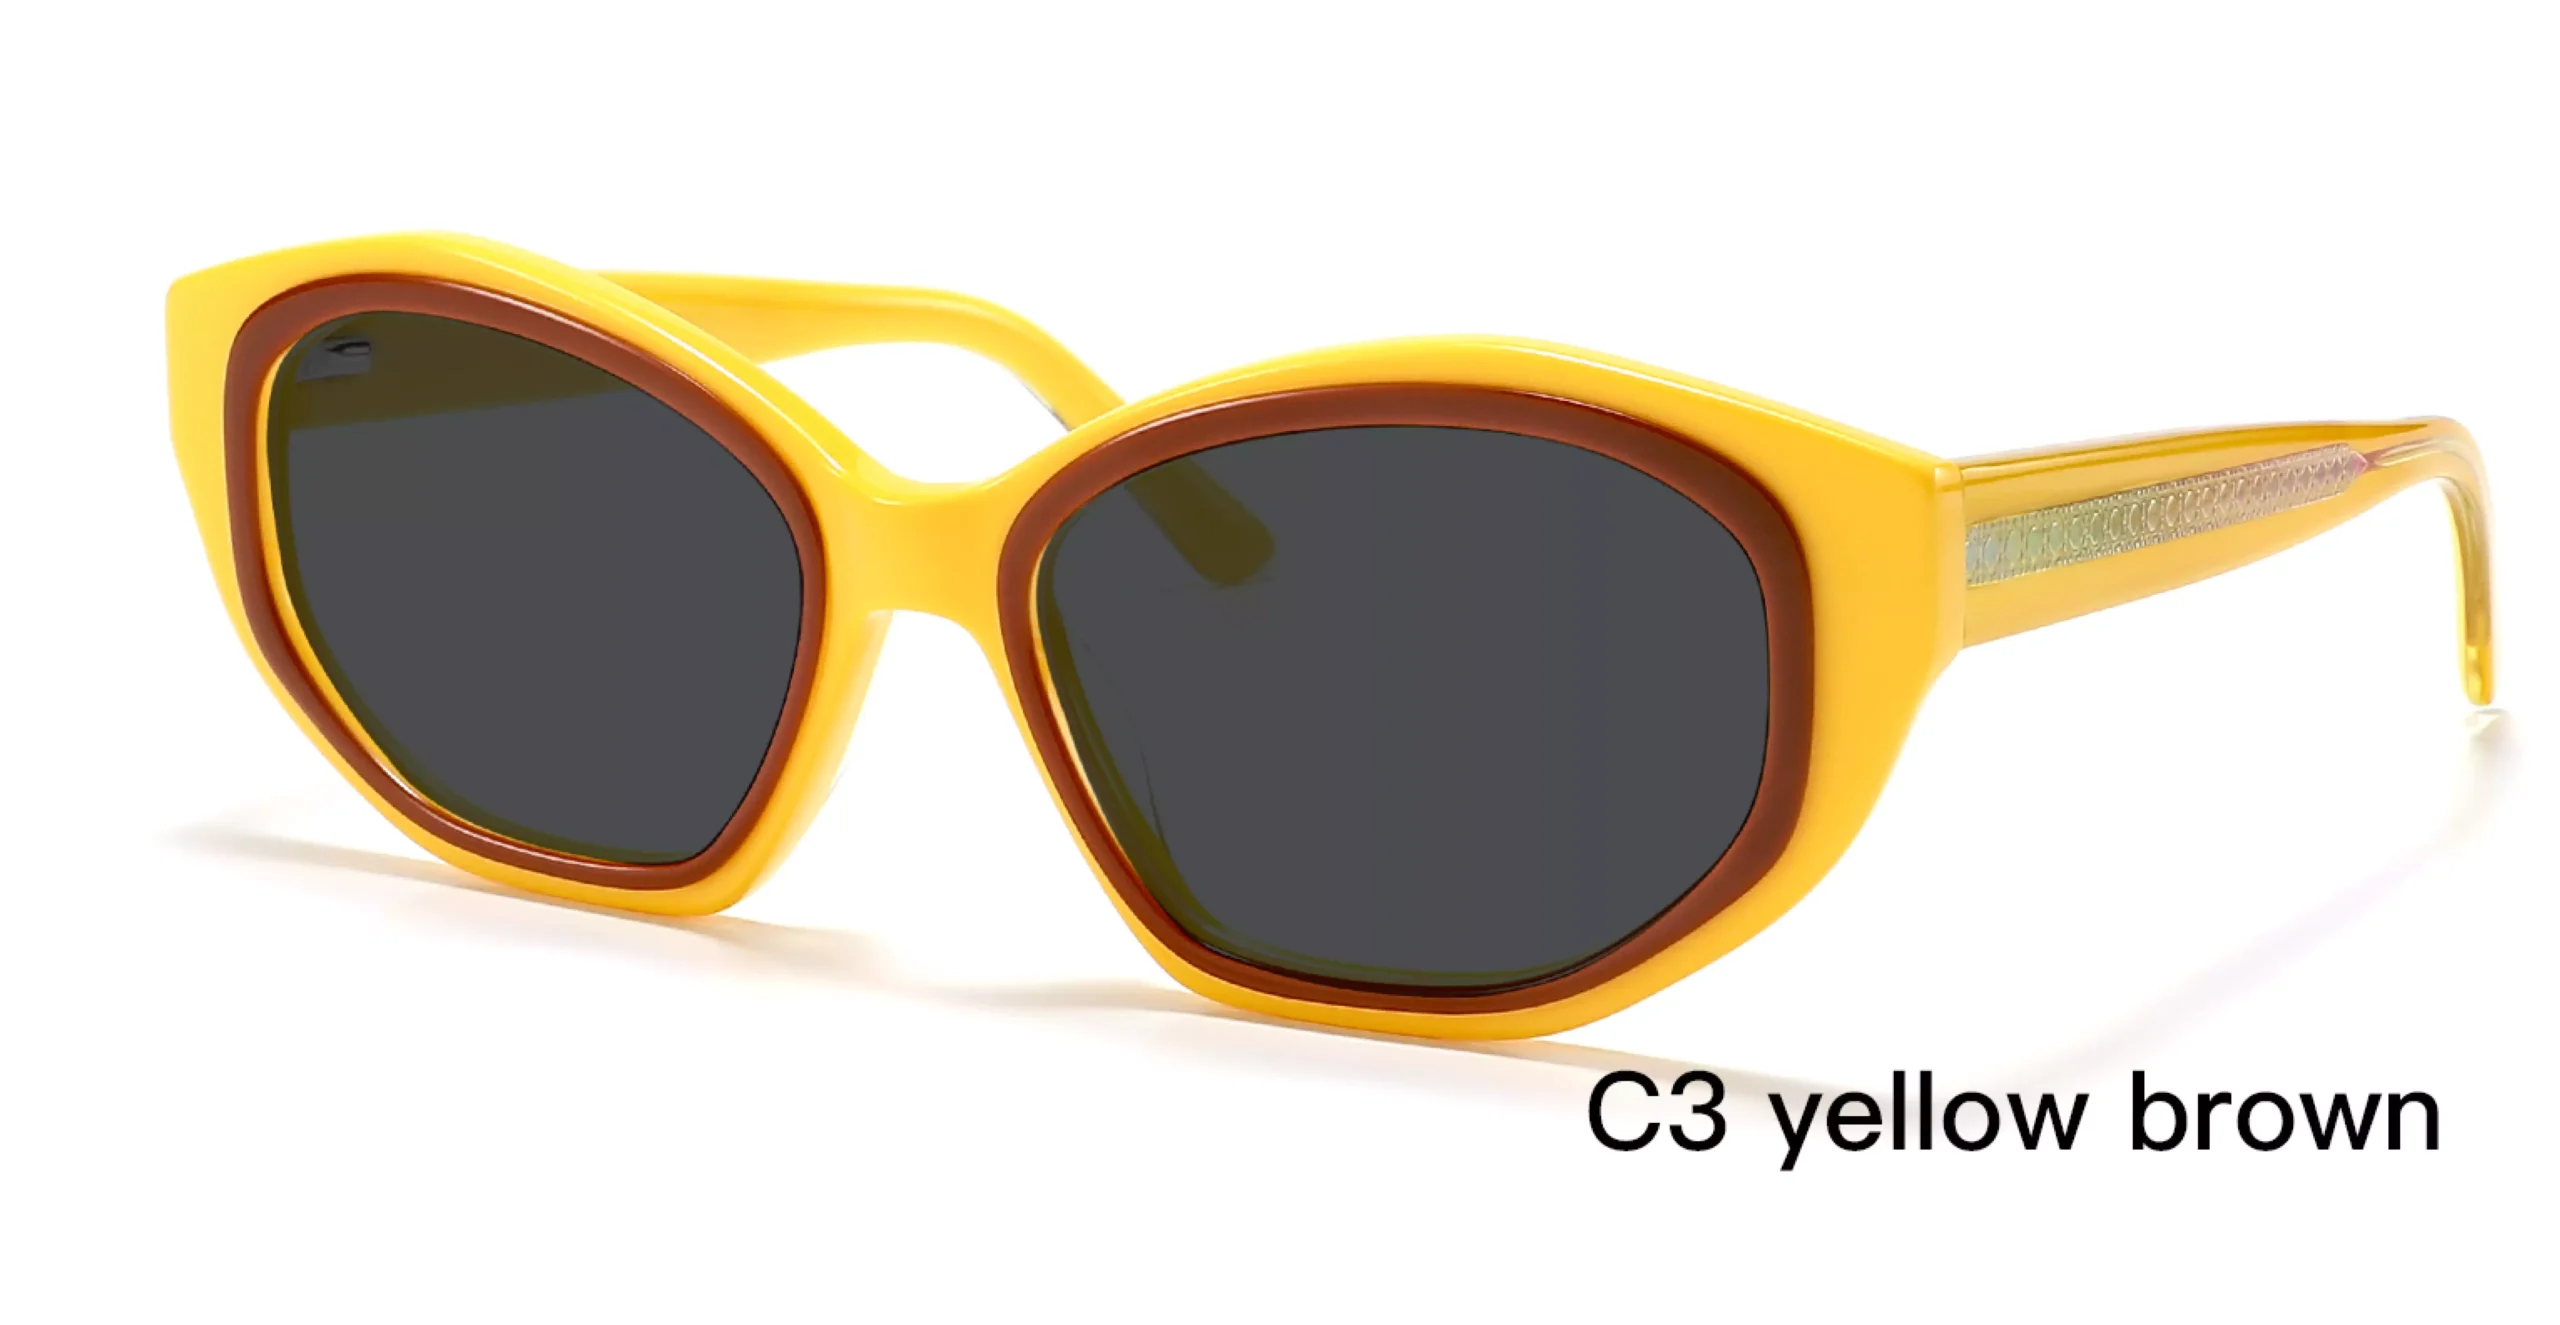 geometric, gradient temple, sunglasses, acetate, yellow brown, 45 degree display, wholesale from China